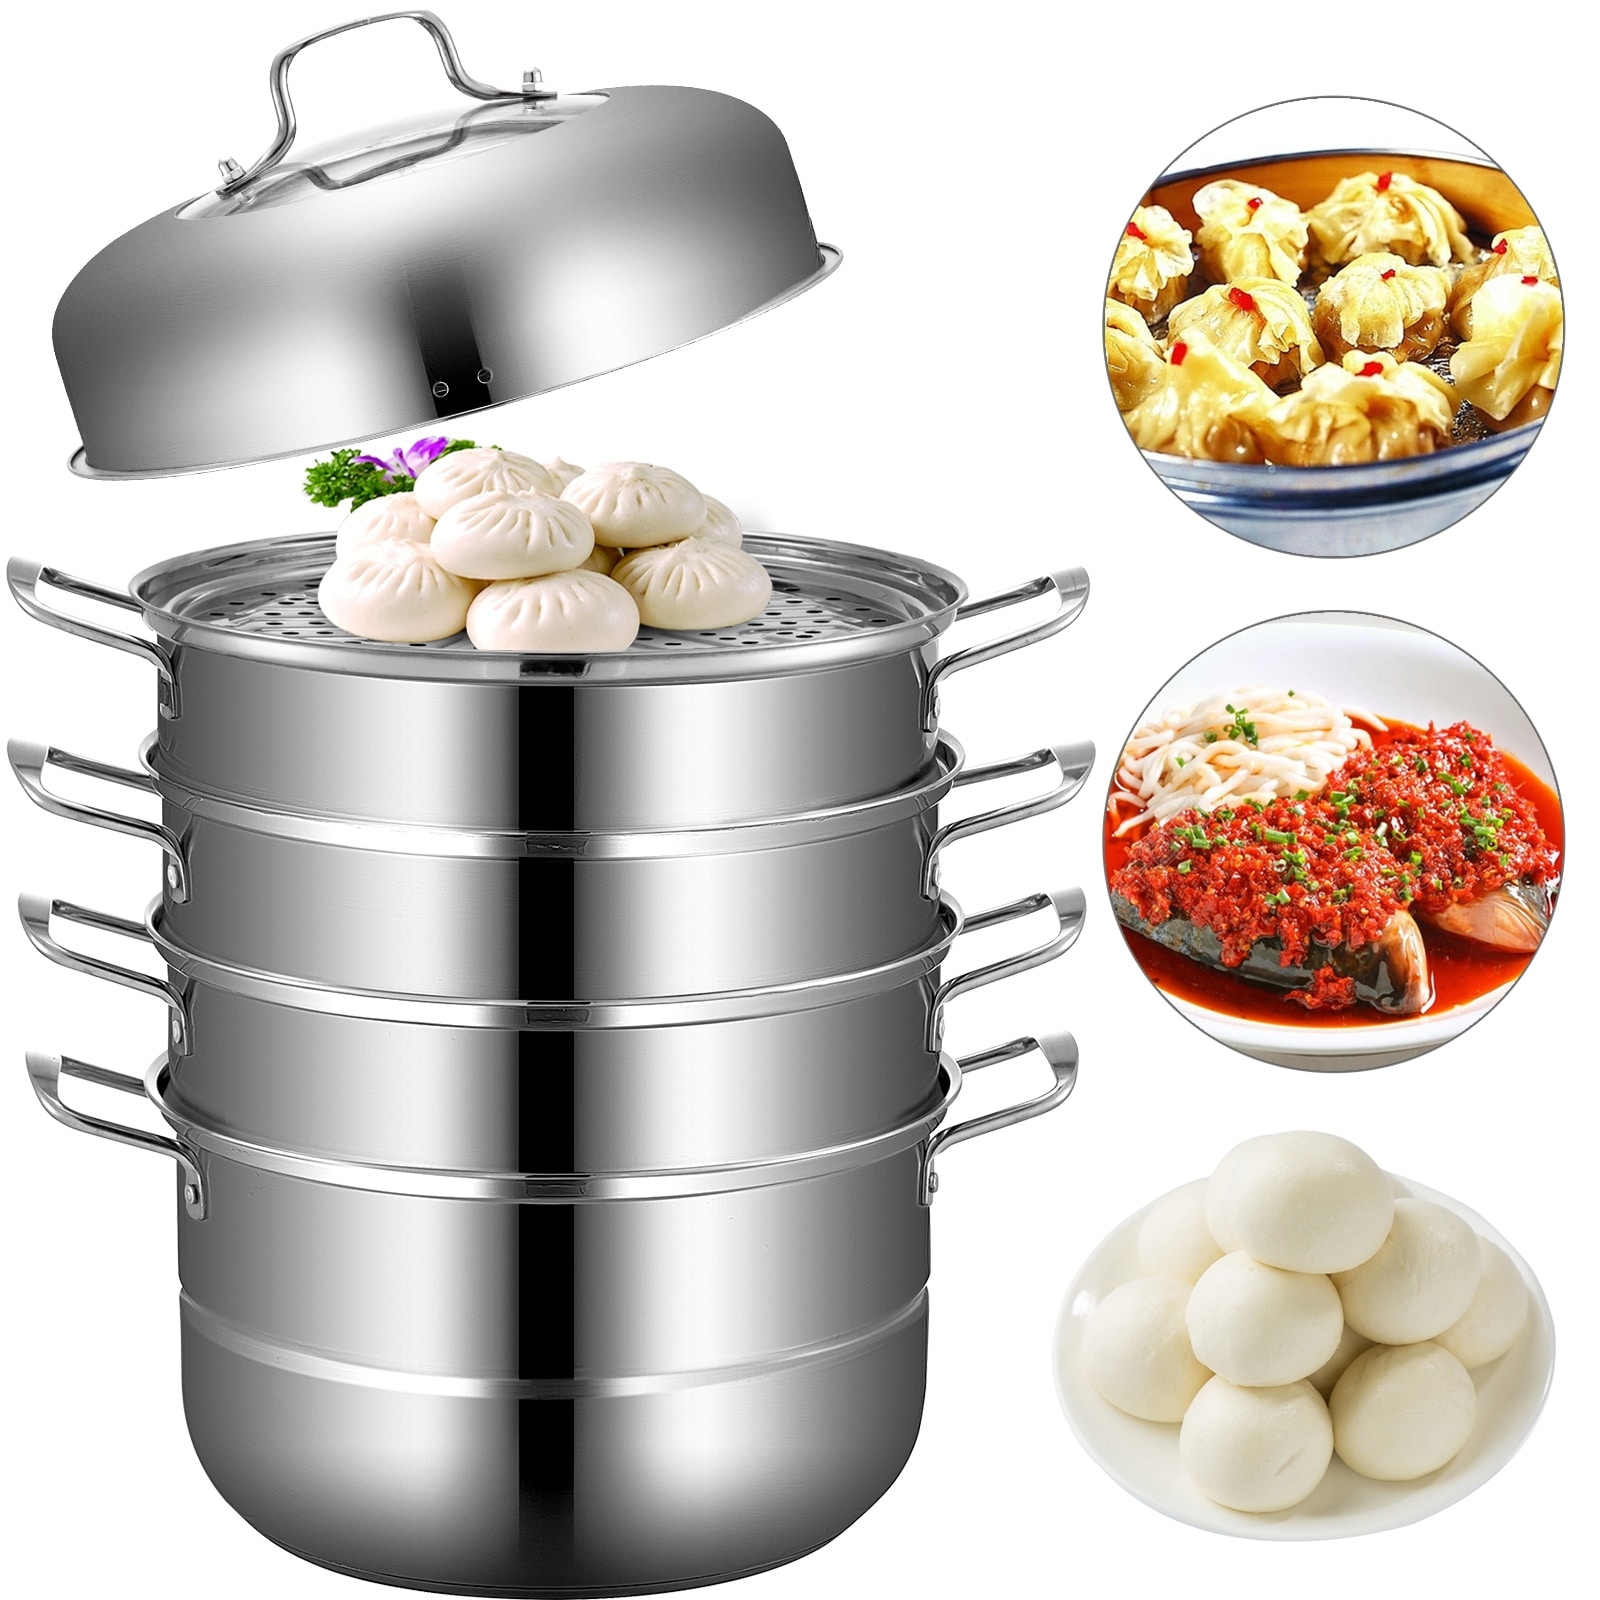 https://ak1.ostkcdn.com/images/products/is/images/direct/149a567a8dcb2442b81ef1ca07d9e650e8281d05/VEVOR-5-Tier-Stainless-Steel-Steamer-11in-Multi-Layer-Cookware-Pot-with-Handles.jpg